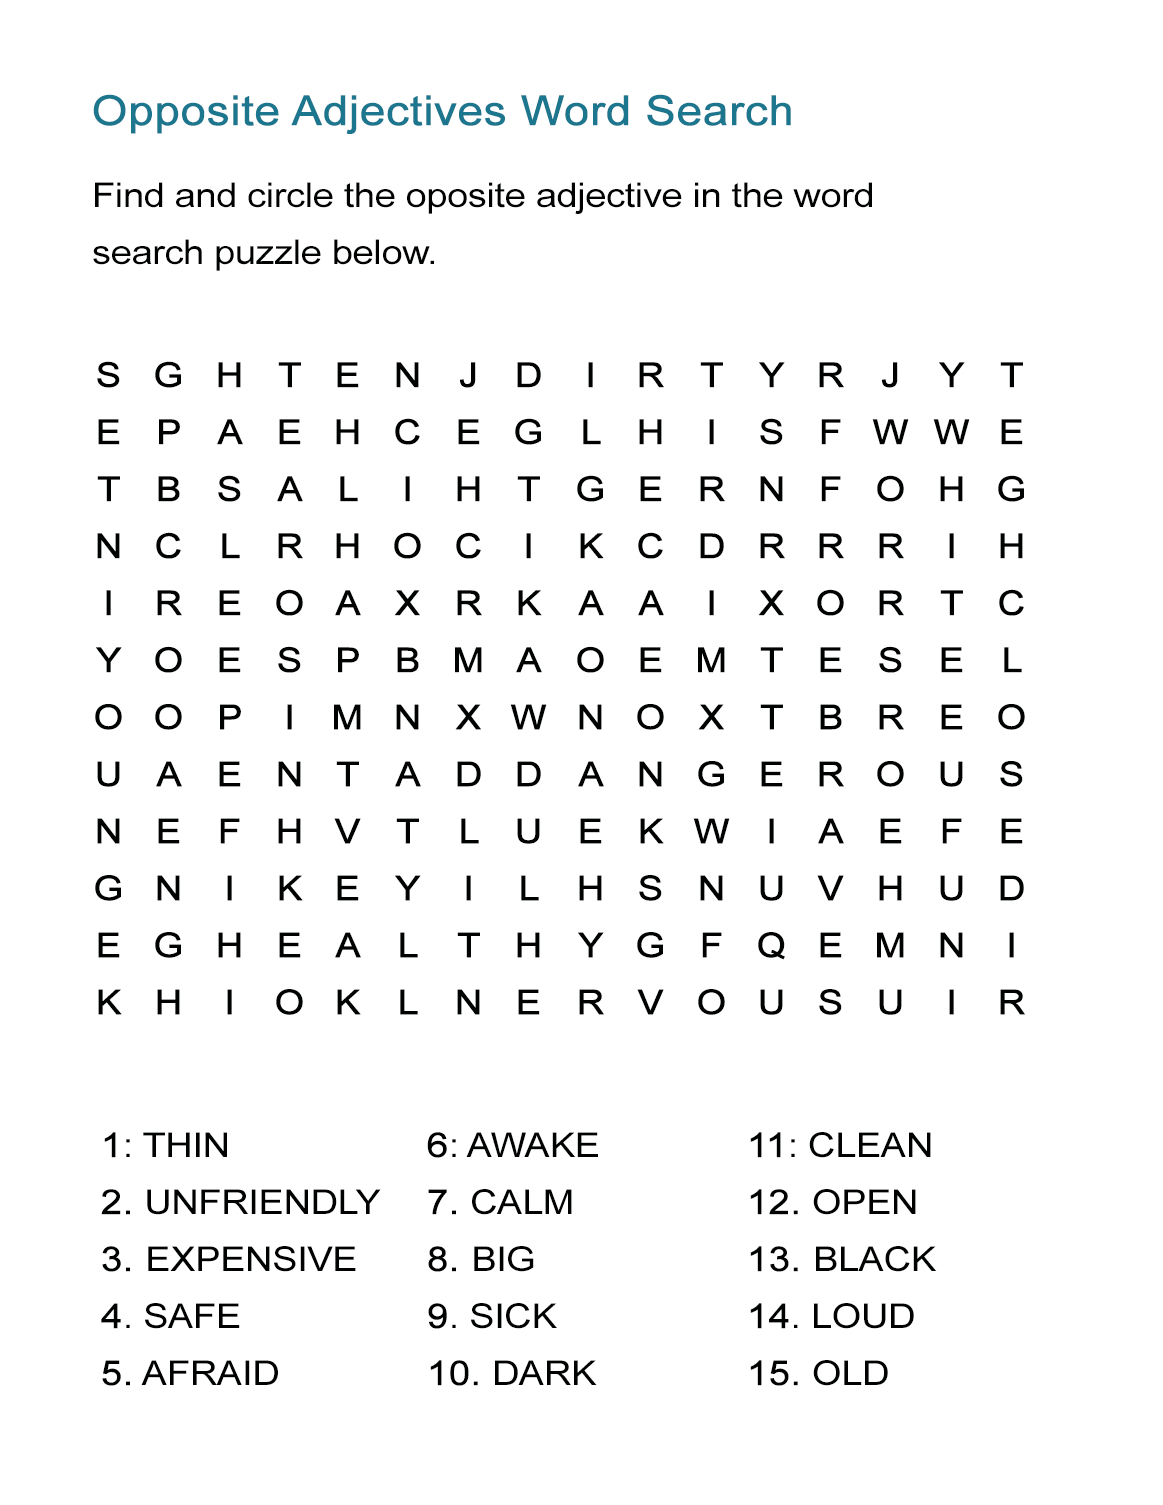 Opposite Adjectives Word Search Puzzle - All Esl - Adjectives Crossword Puzzle Printable